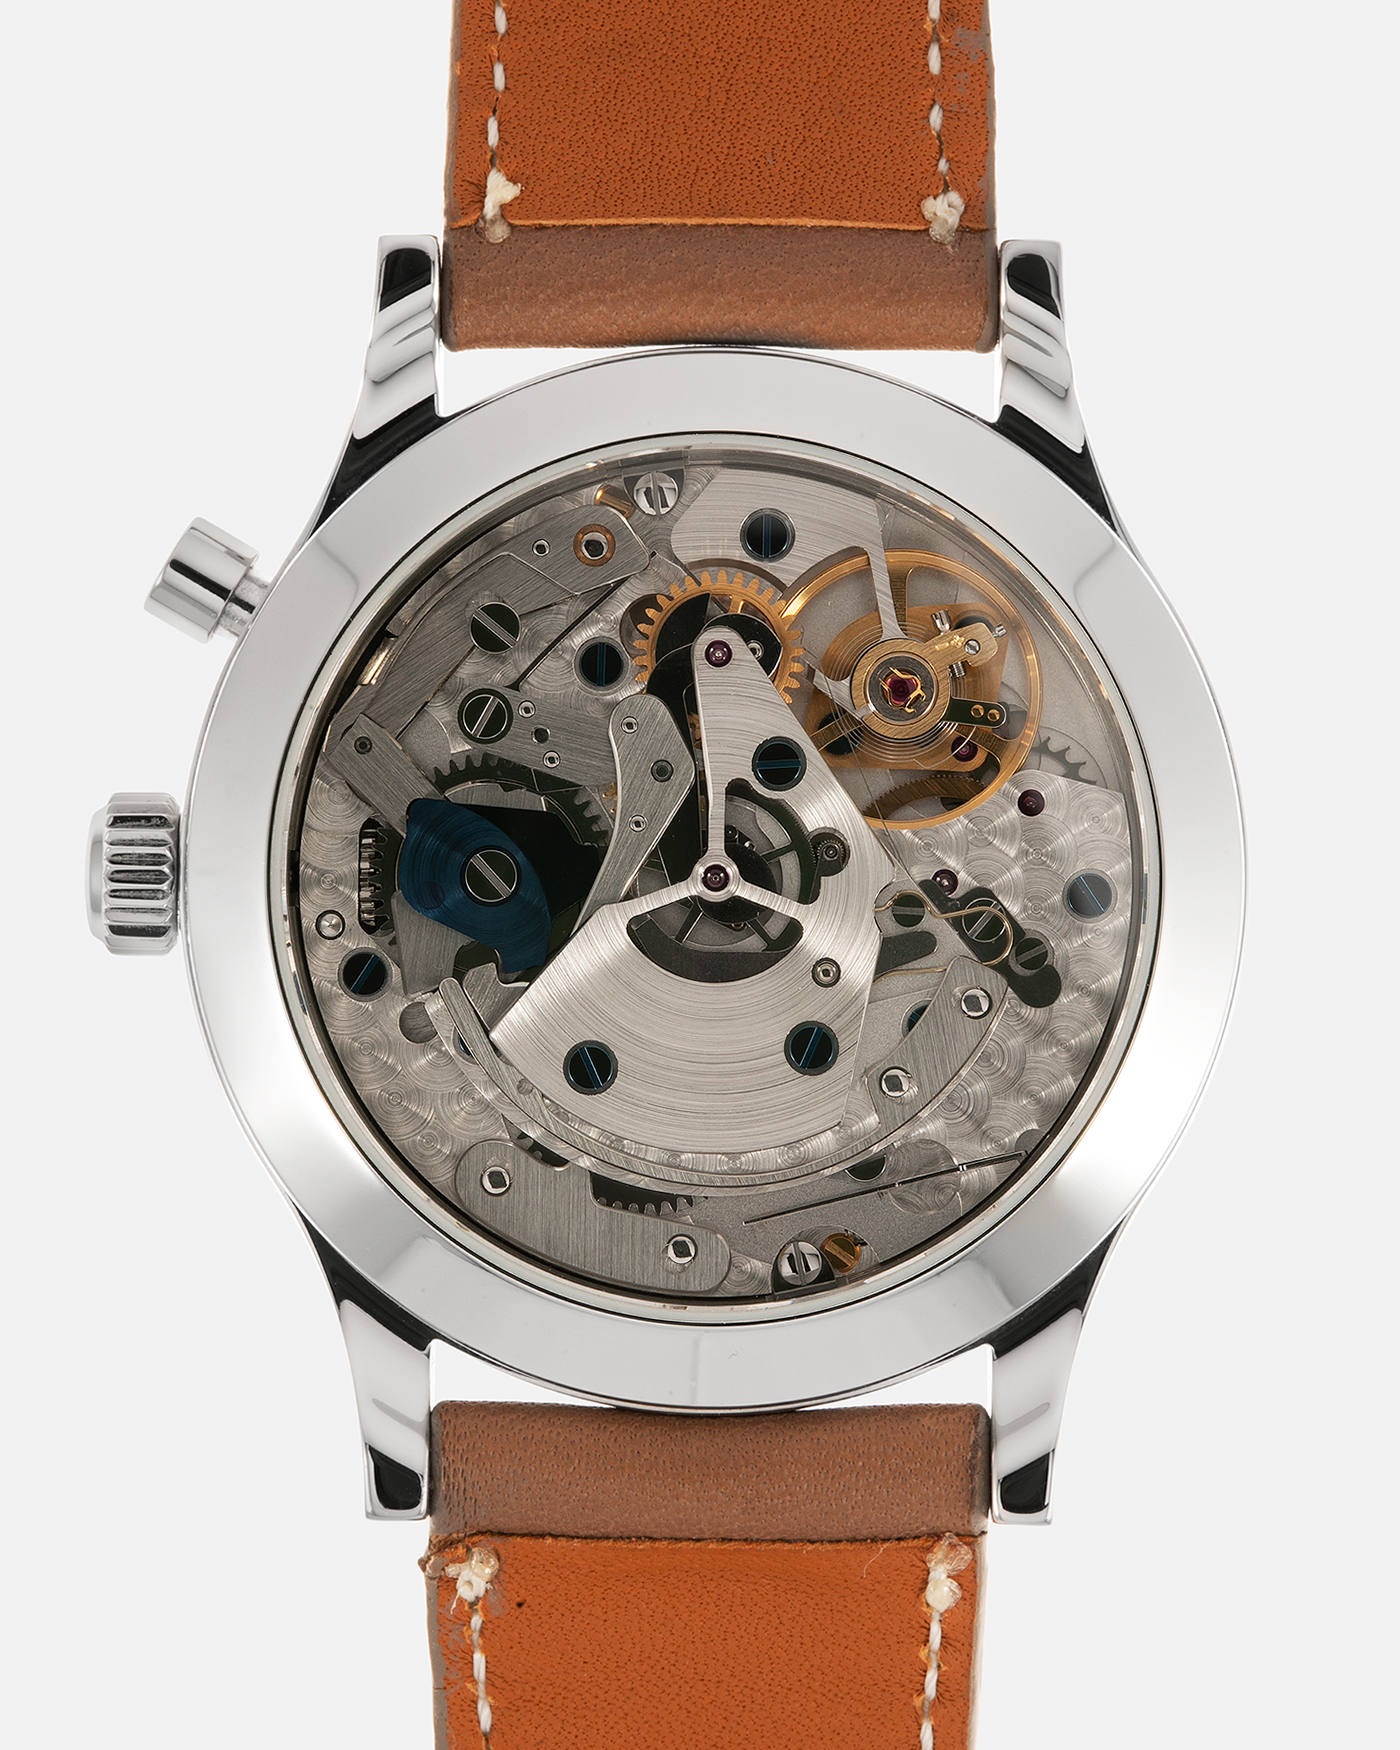 Brand: Habring² Model: Monopusher ‘Custom Dial’ Year: 2020’s Material: Stainless Steel  Movement: Habring² Cal. A11C-H1, Manual-Winding Case Diameter: 38.5mm Lug Width: 20mm Strap: Nostime Tanned Calf Leather Strap, additional Habring² Tanned Calf Leather Strap, and Milanese Stainless Steel Bracelet